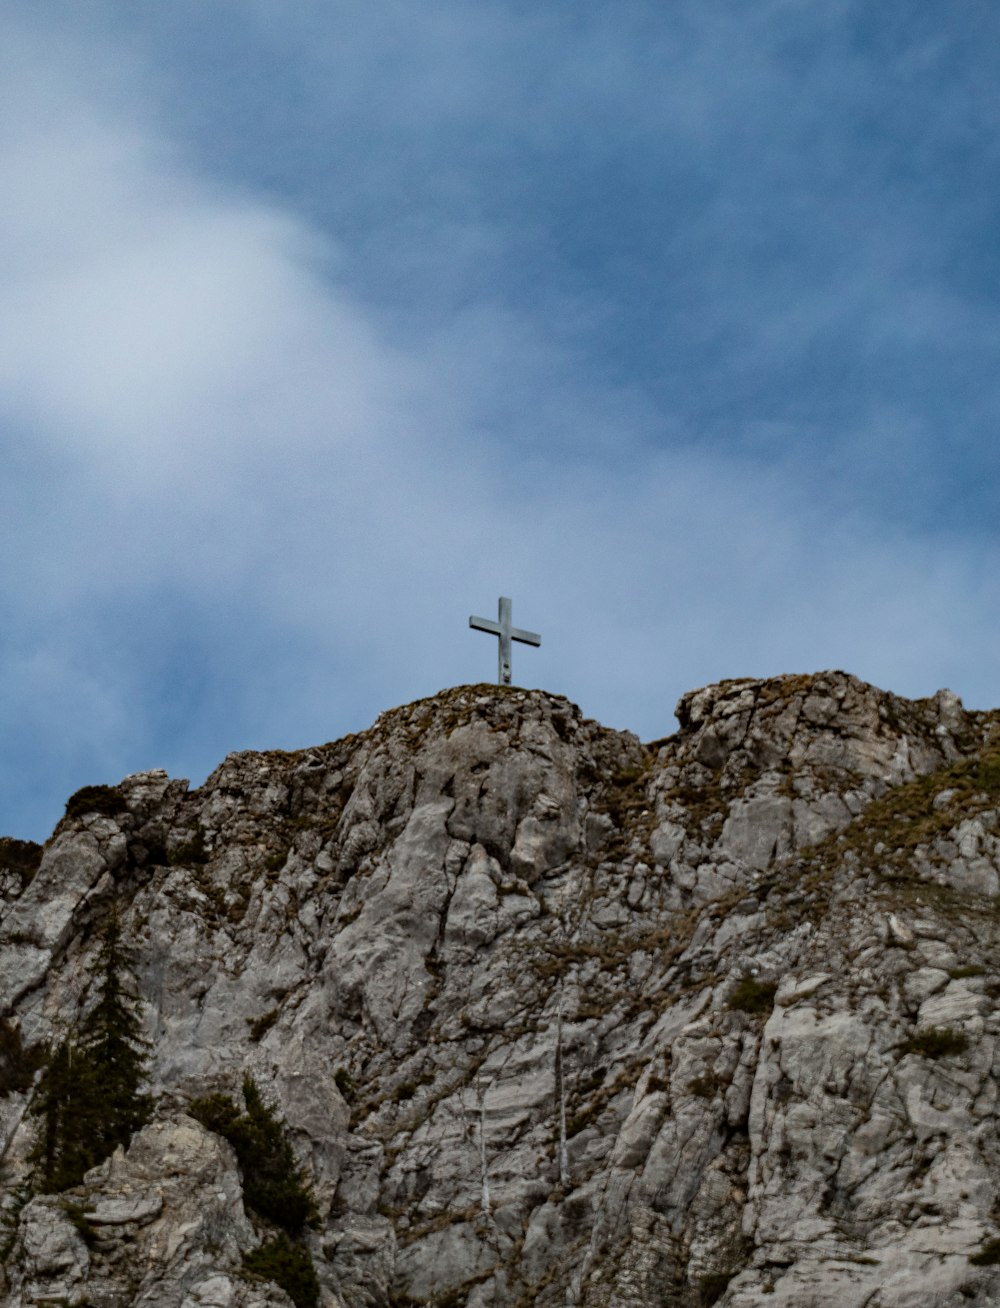 a cross on top of a mountain with a sky background